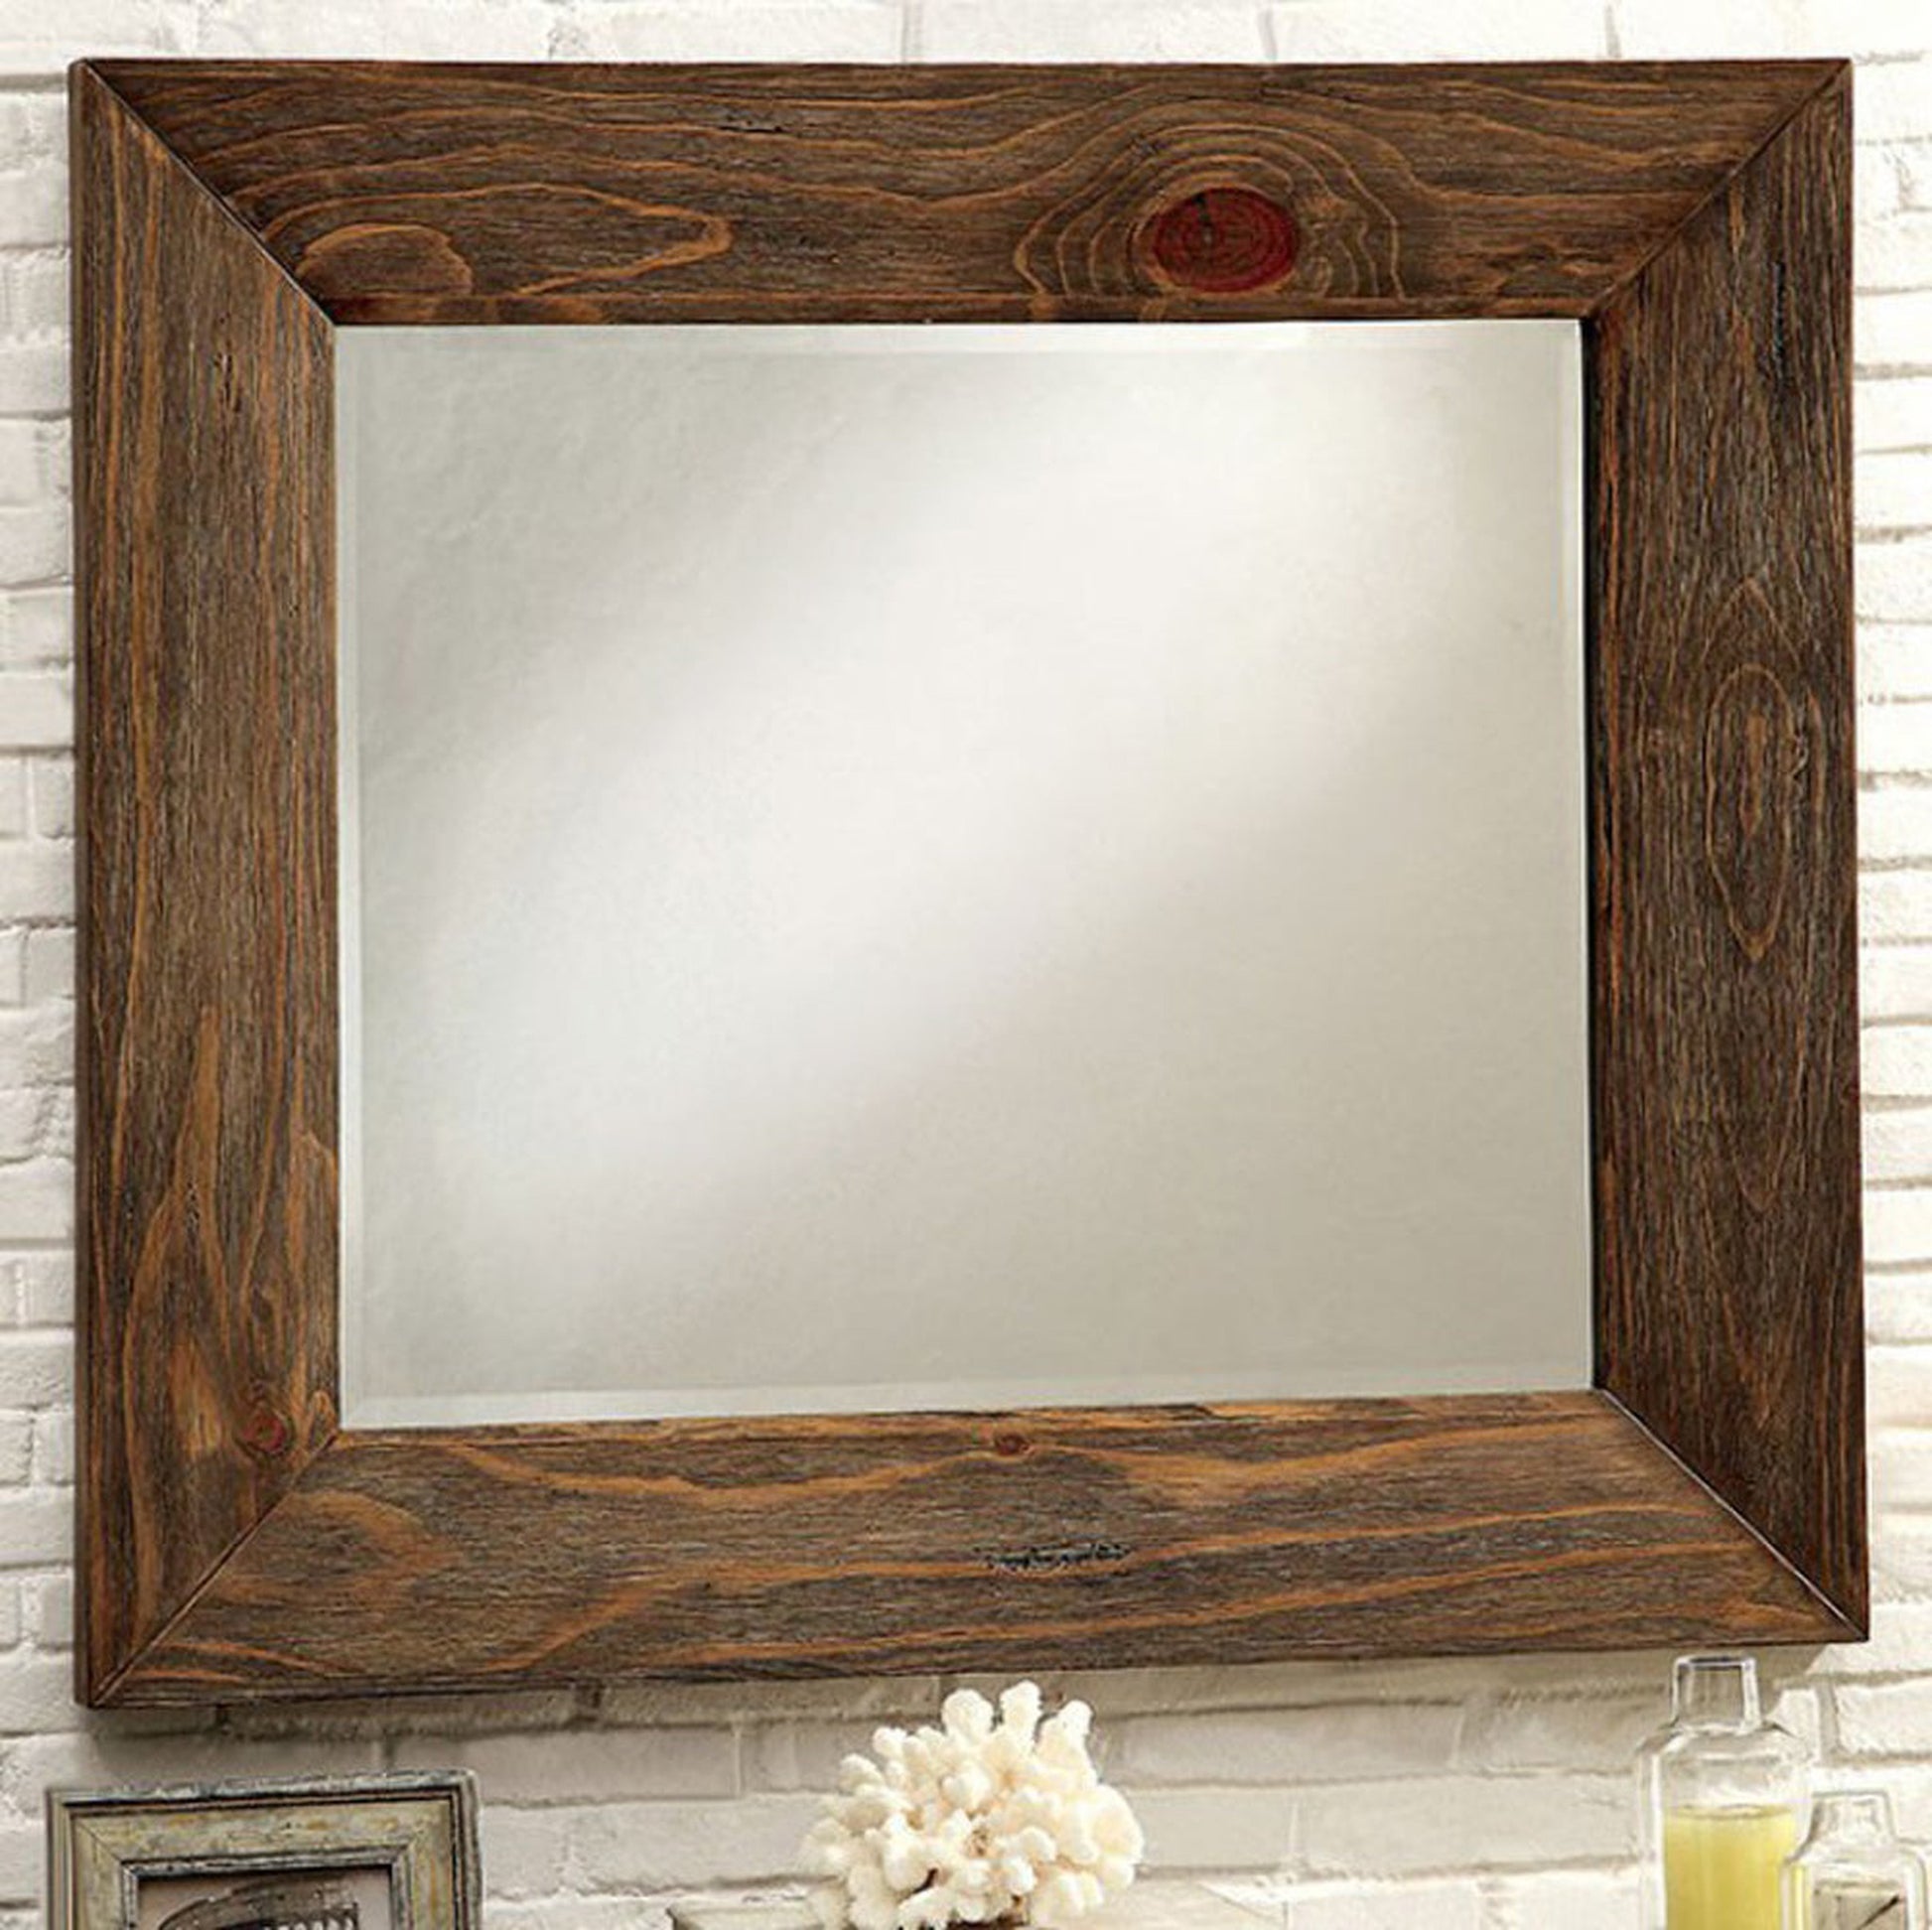 Benzara Coimbra Rustic Natural Tone Finish Transitional Style Wooden Framed Wall Mirror